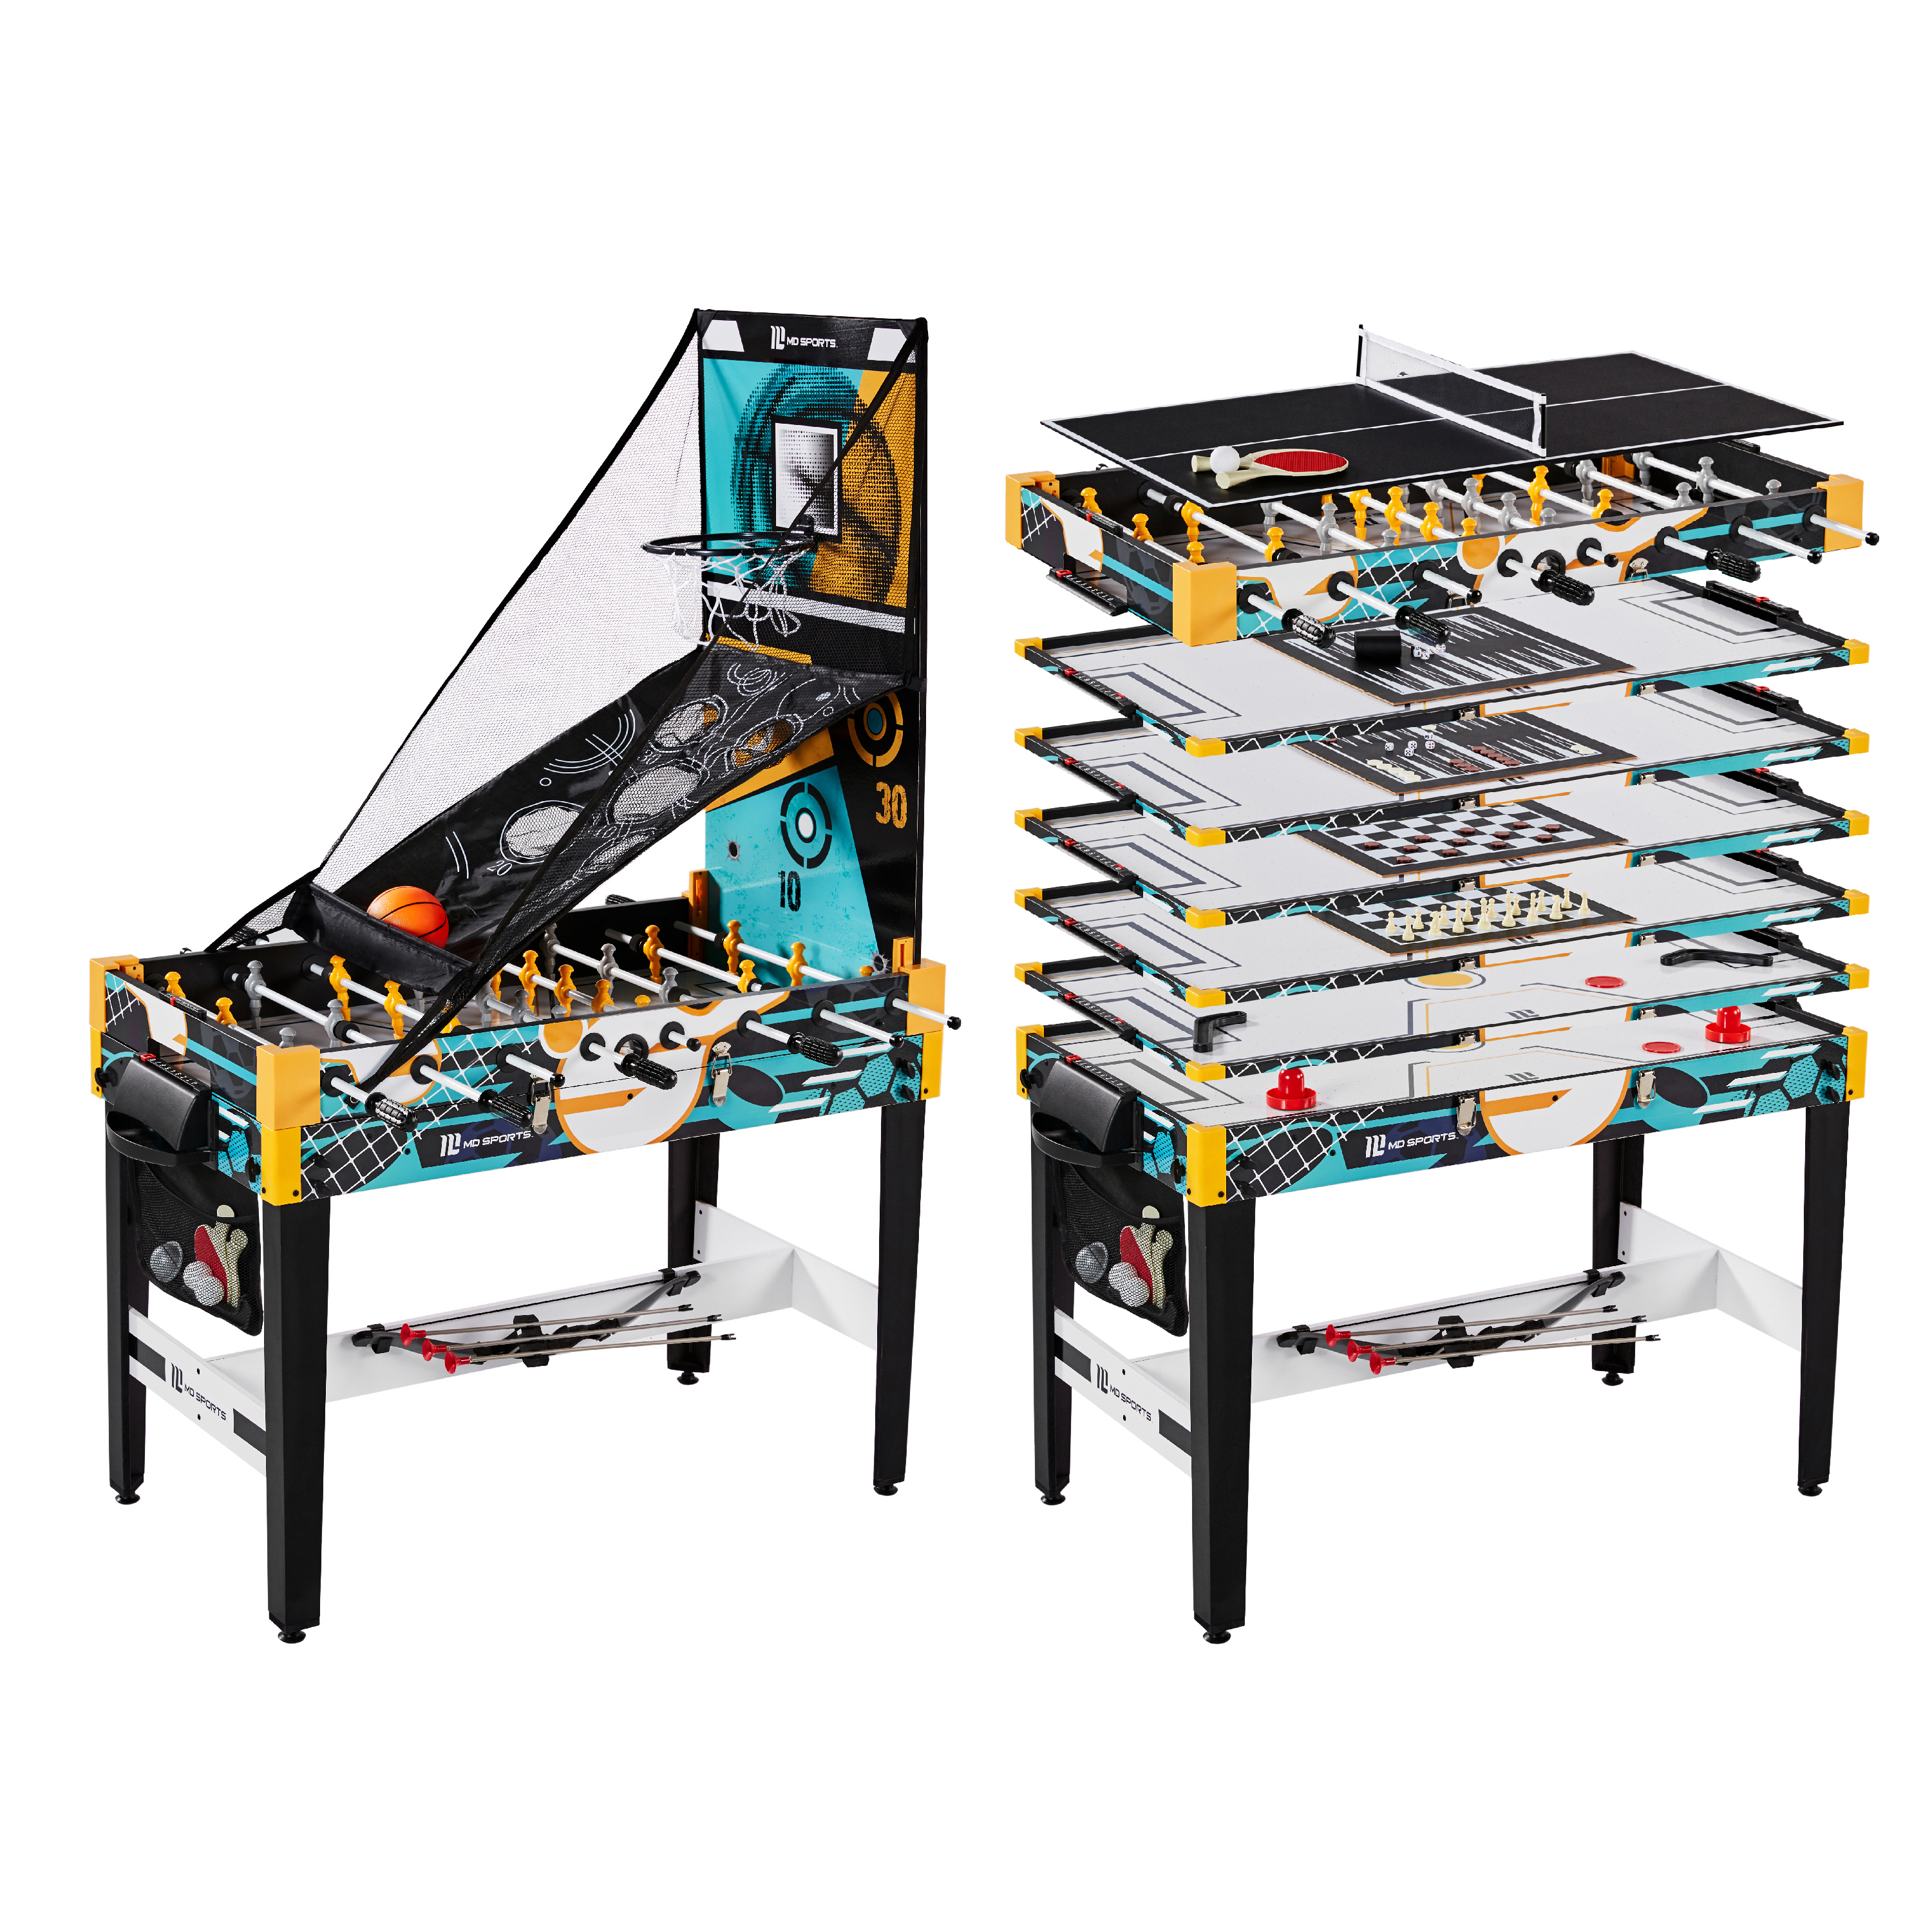 MD Sports 48-inch 12 in 1 Combo Game Table with Air Hockey, Foosball, Table Tennis, Basketball and more - image 1 of 13